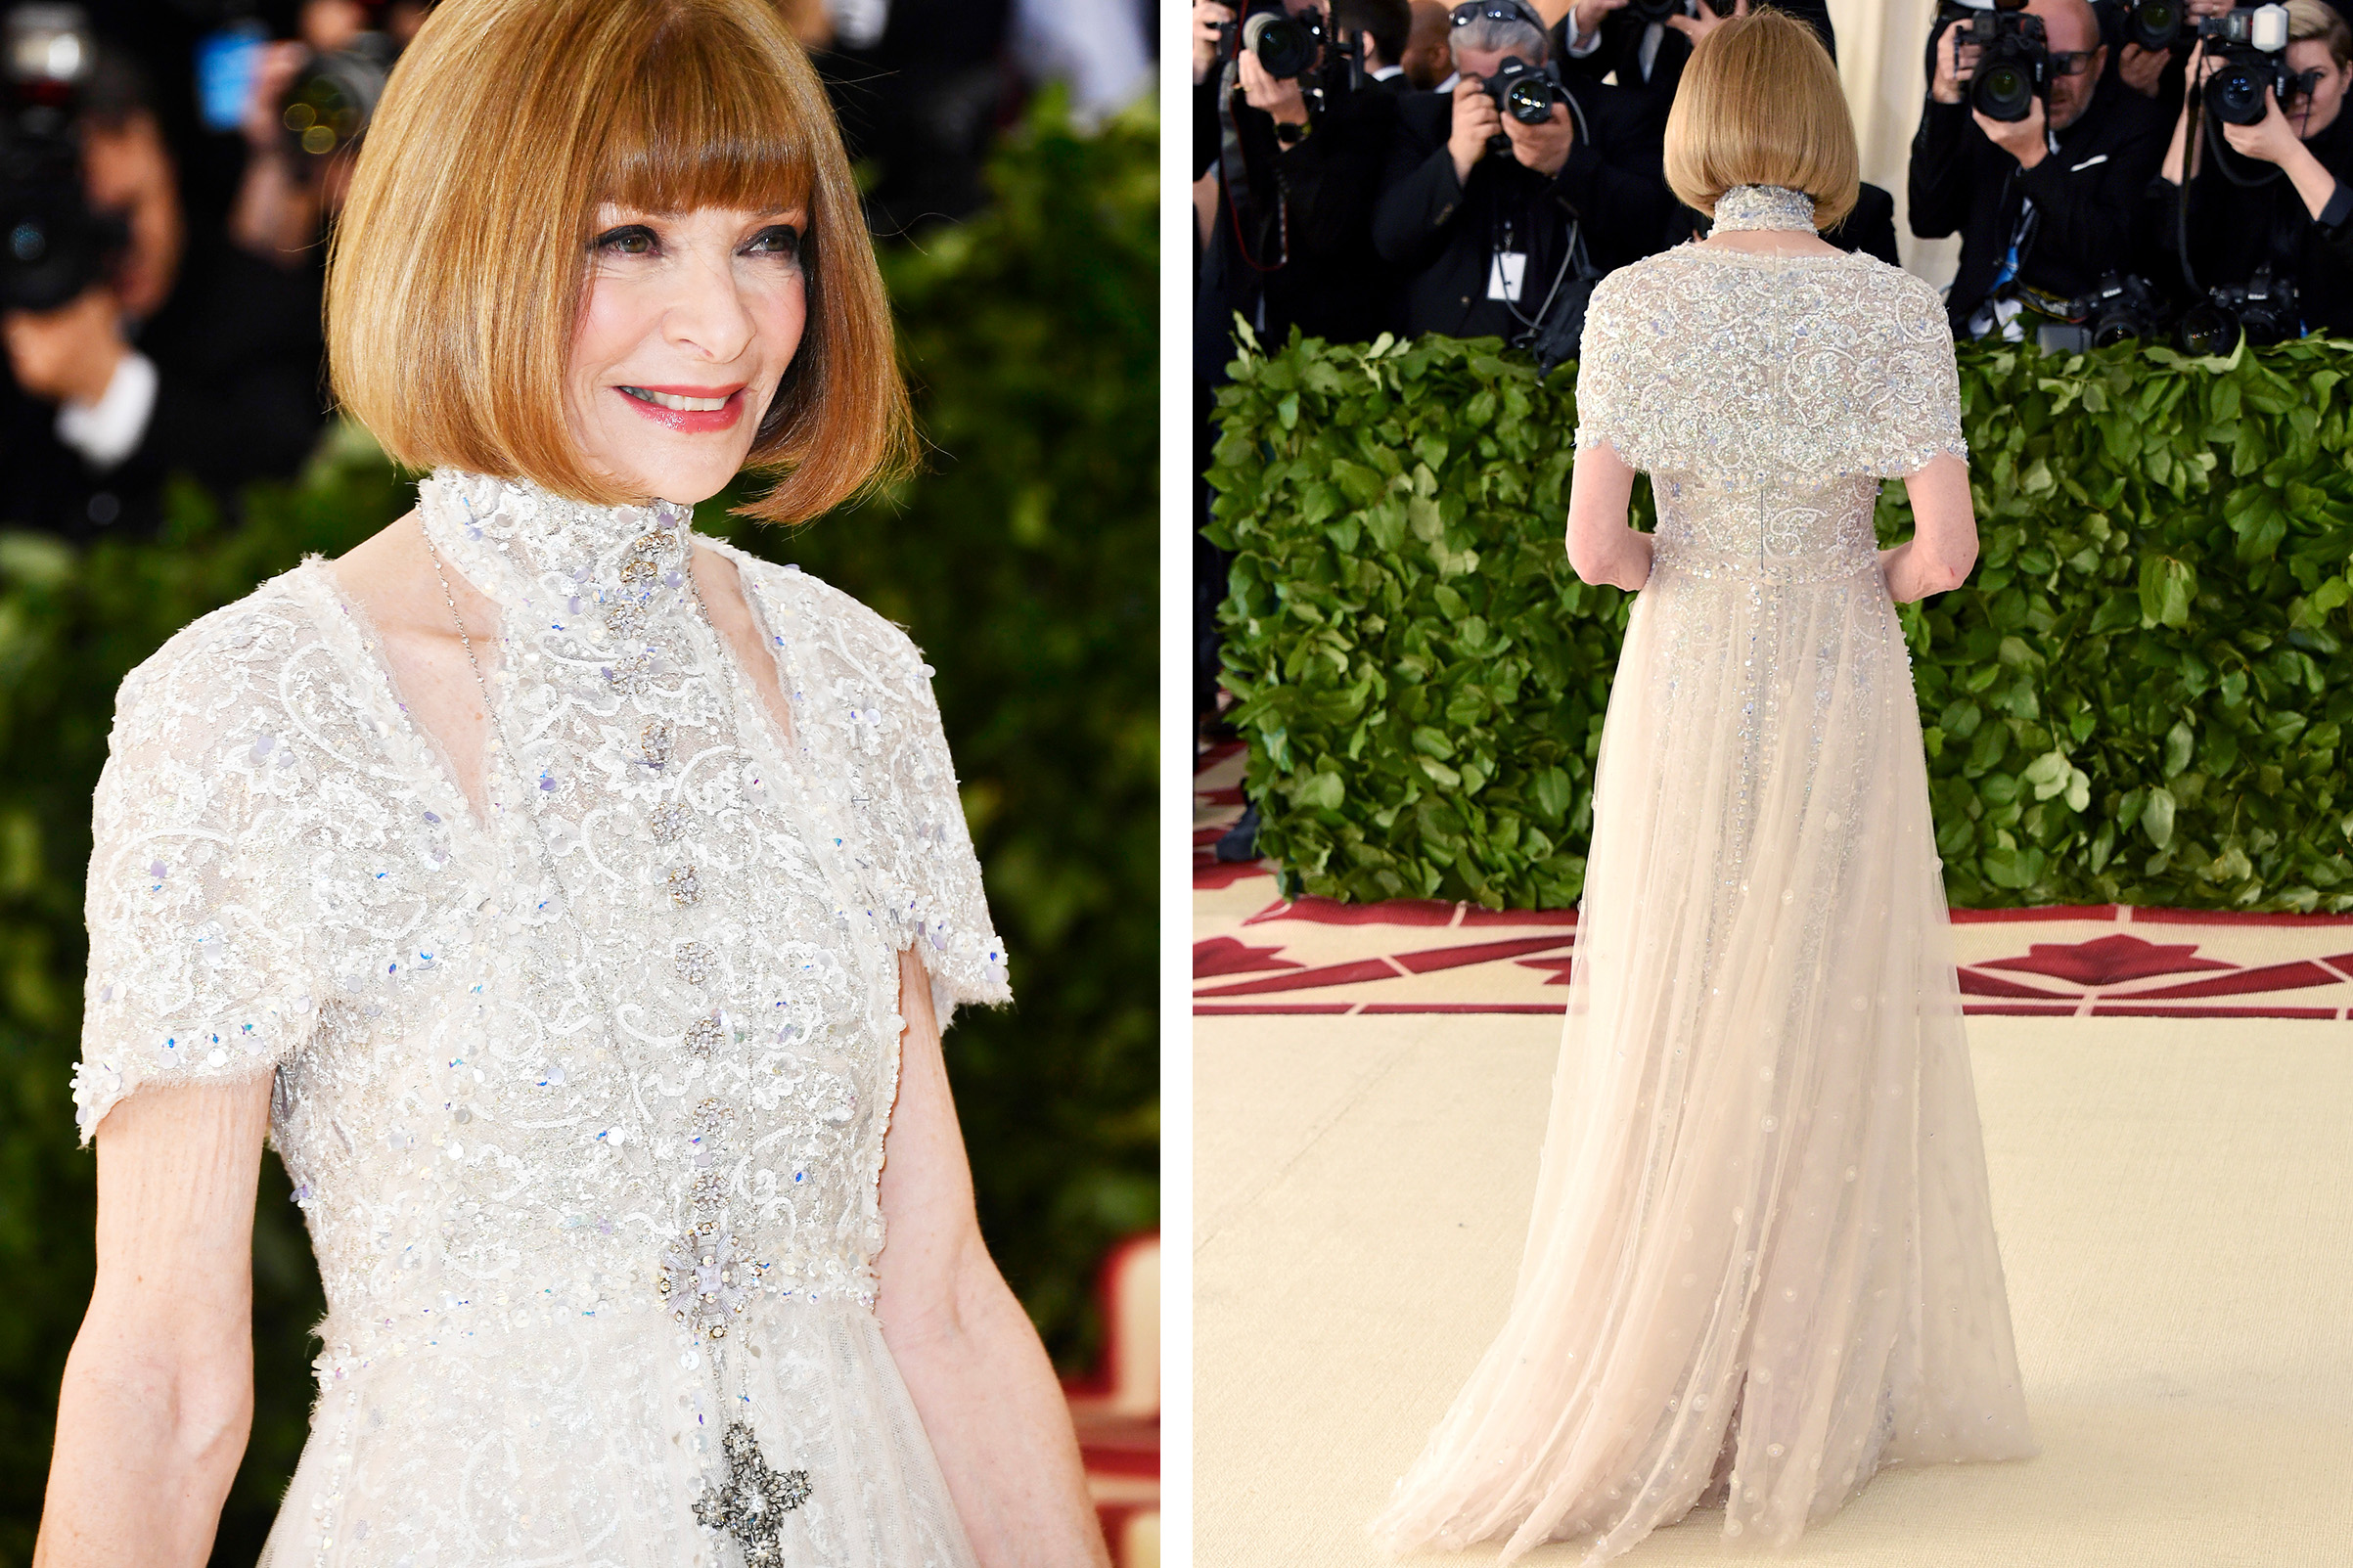 Anna Wintour (Getty Images (2))